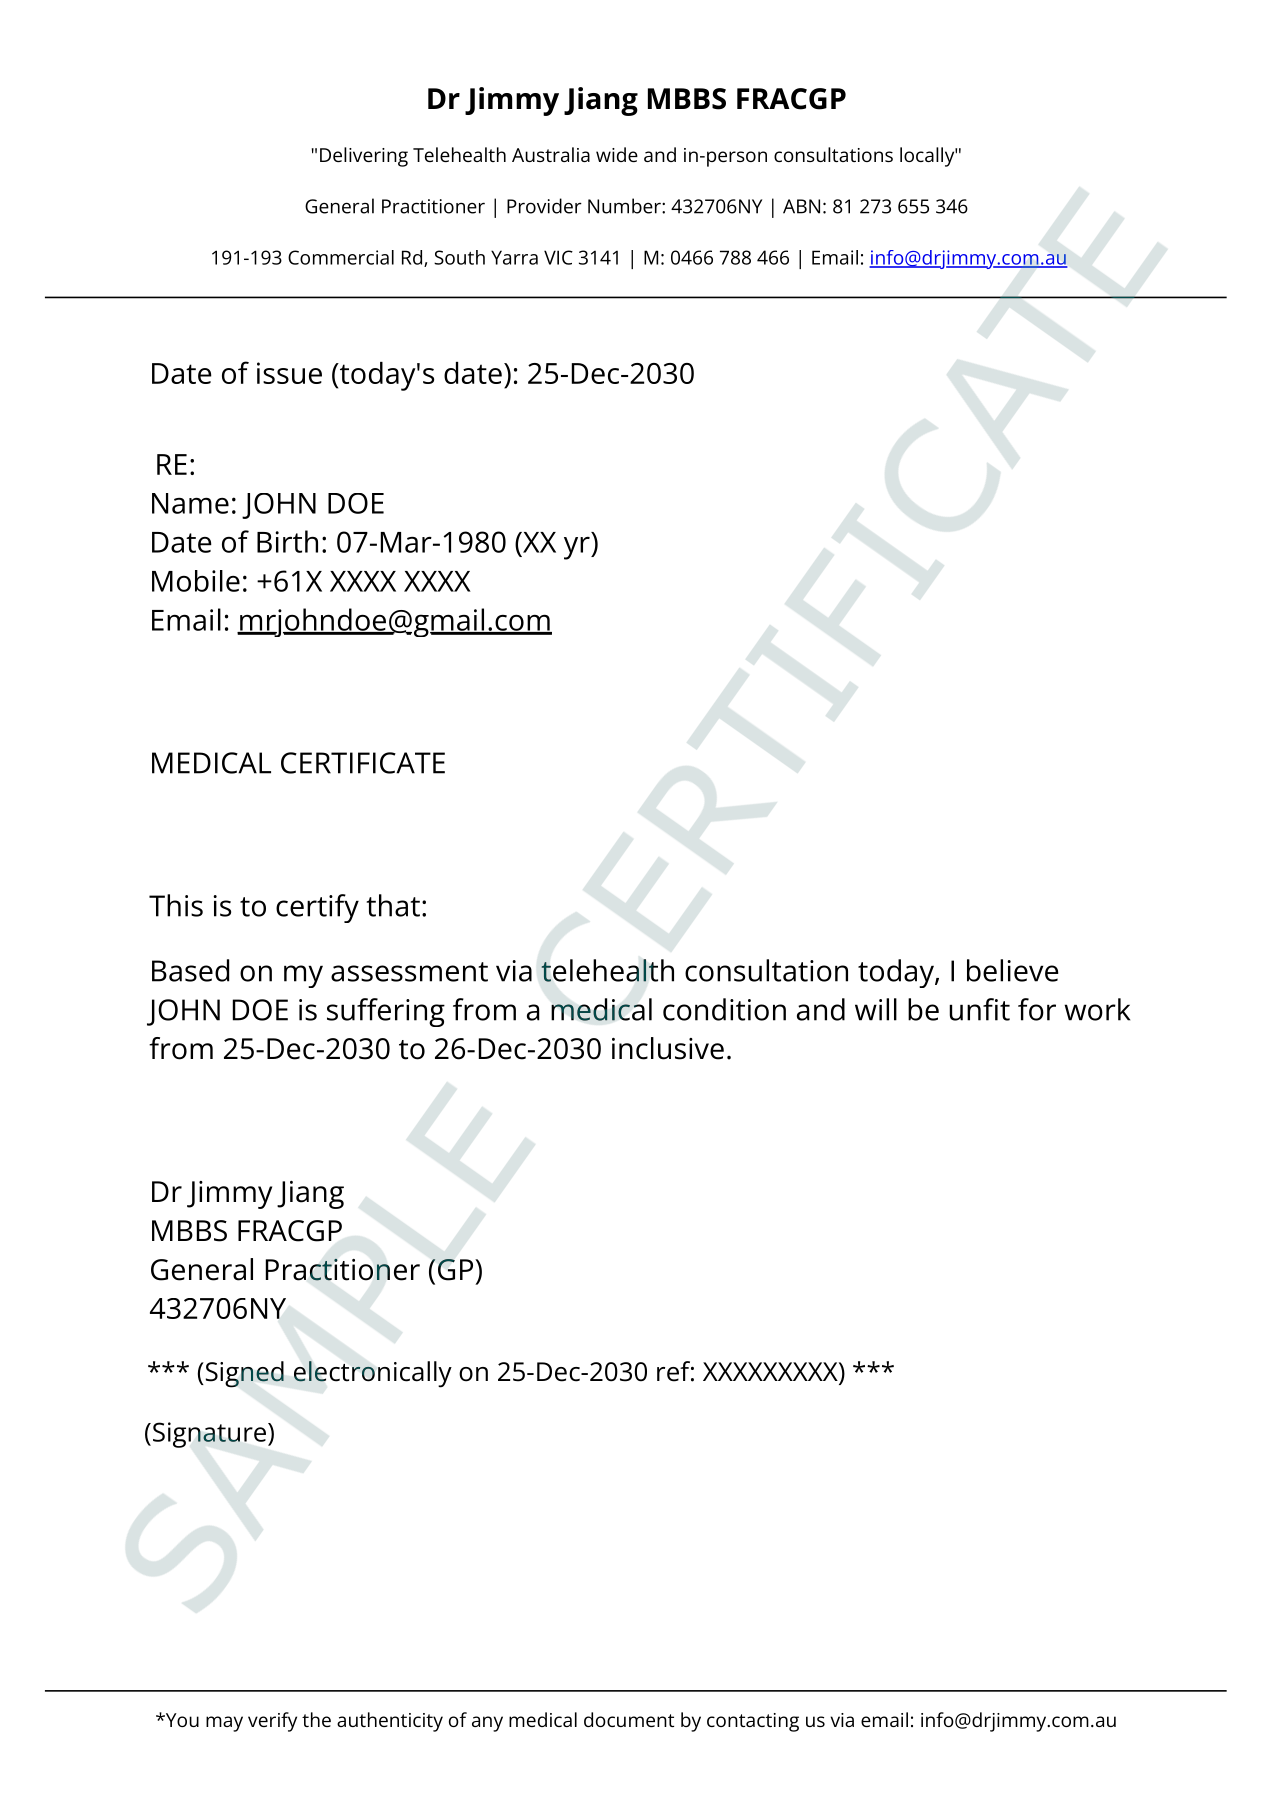 A sample of a Medical Certificate issued by Dr Jimmy